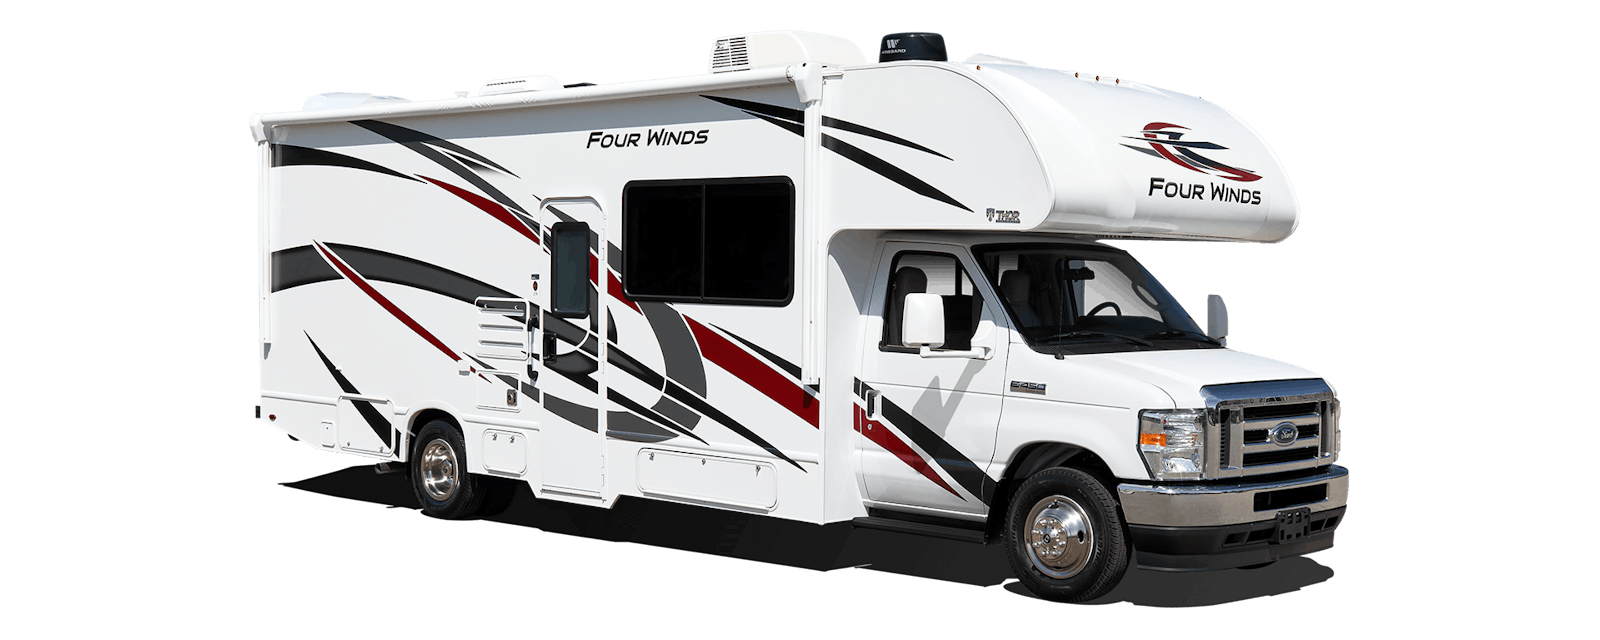 2022 Thor Four Winds Class C RV Autumn Red Standard Graphics All Floor Plans Exterior